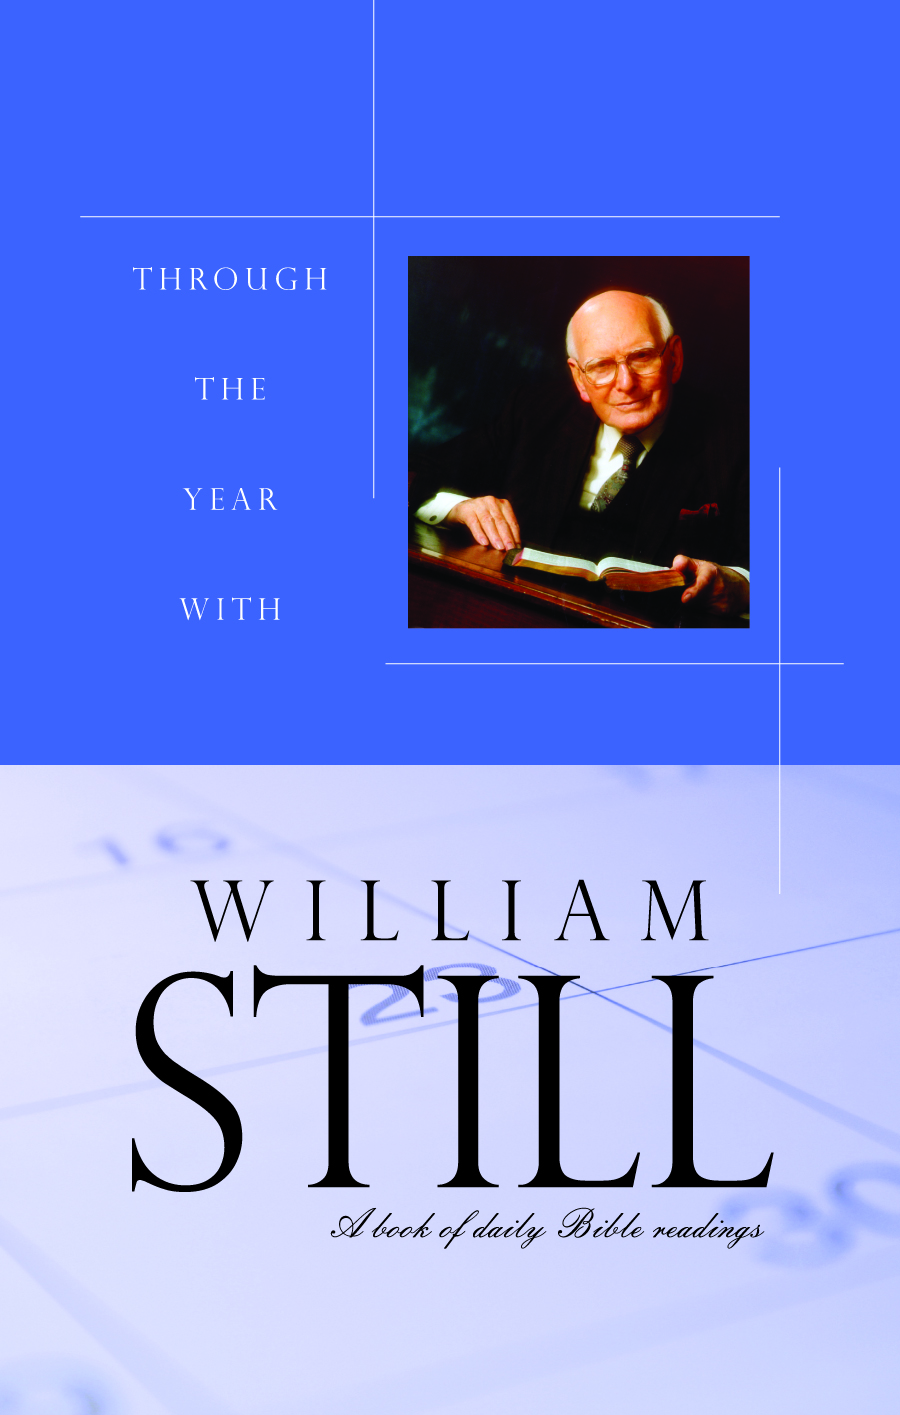 Through the Year With William Still